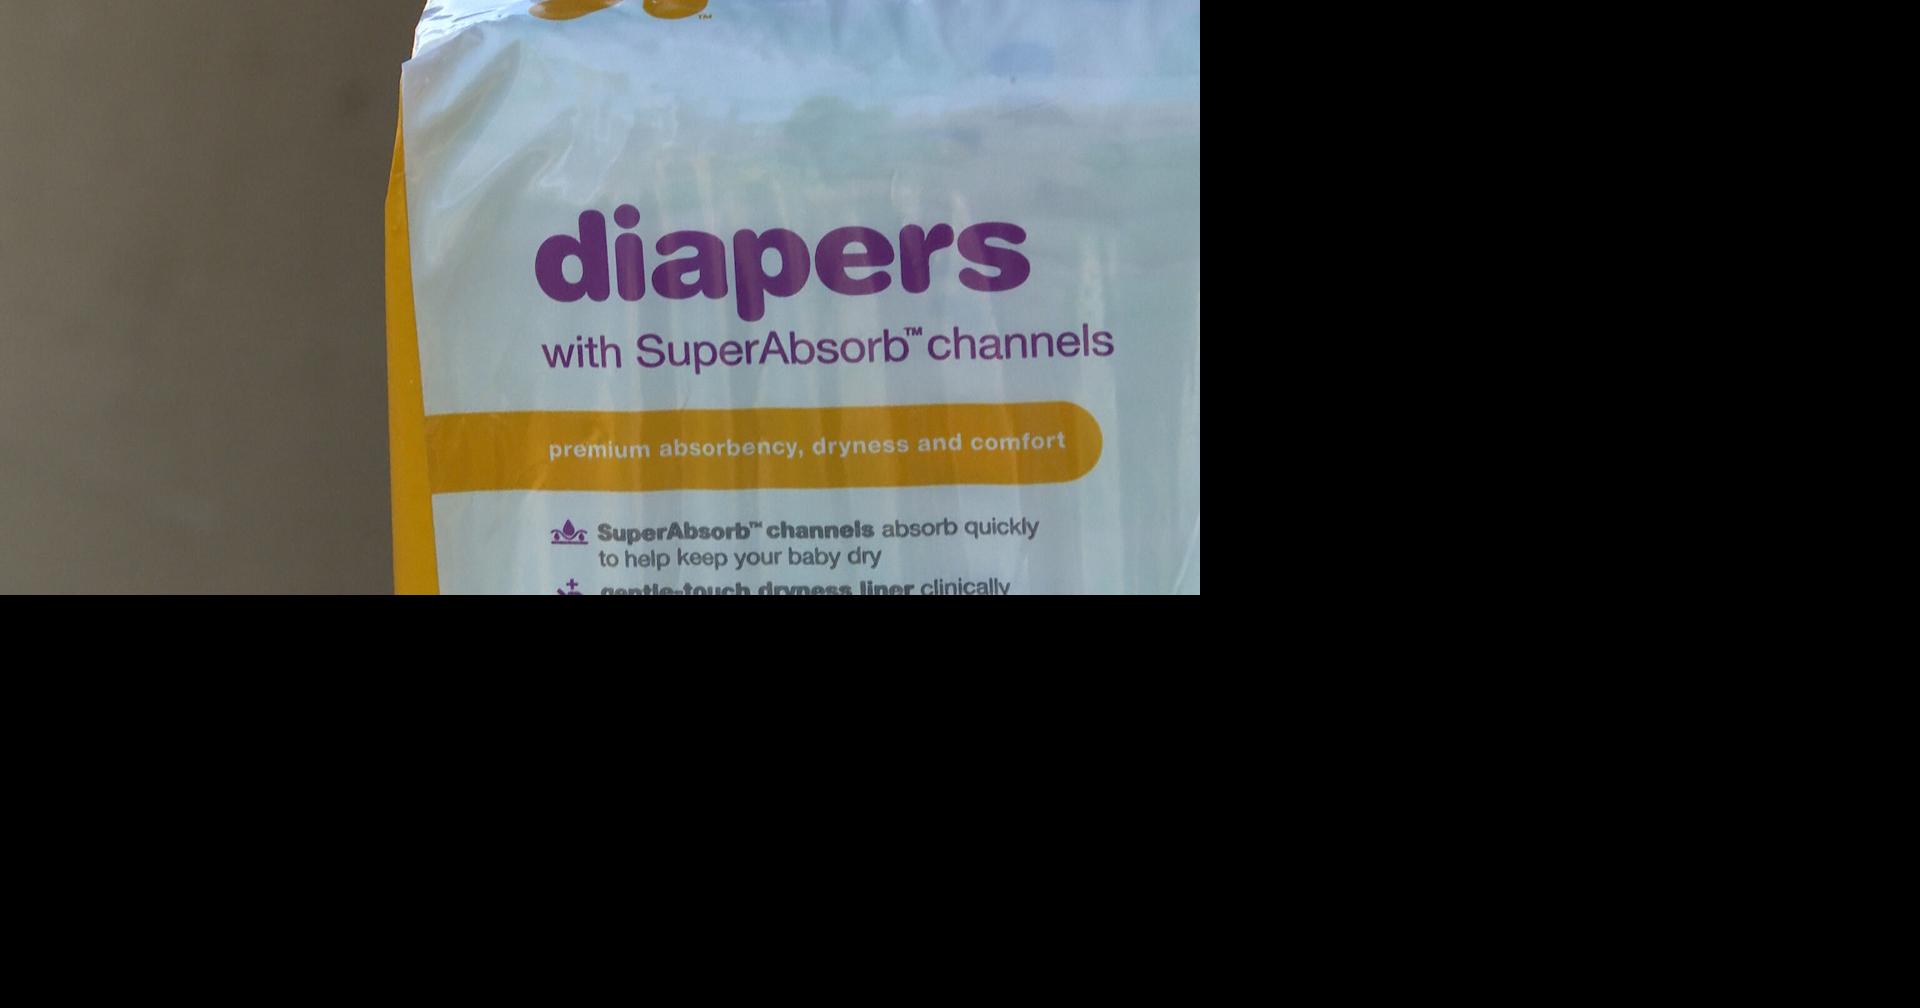 National diaper awareness week begins with open-house ceremony